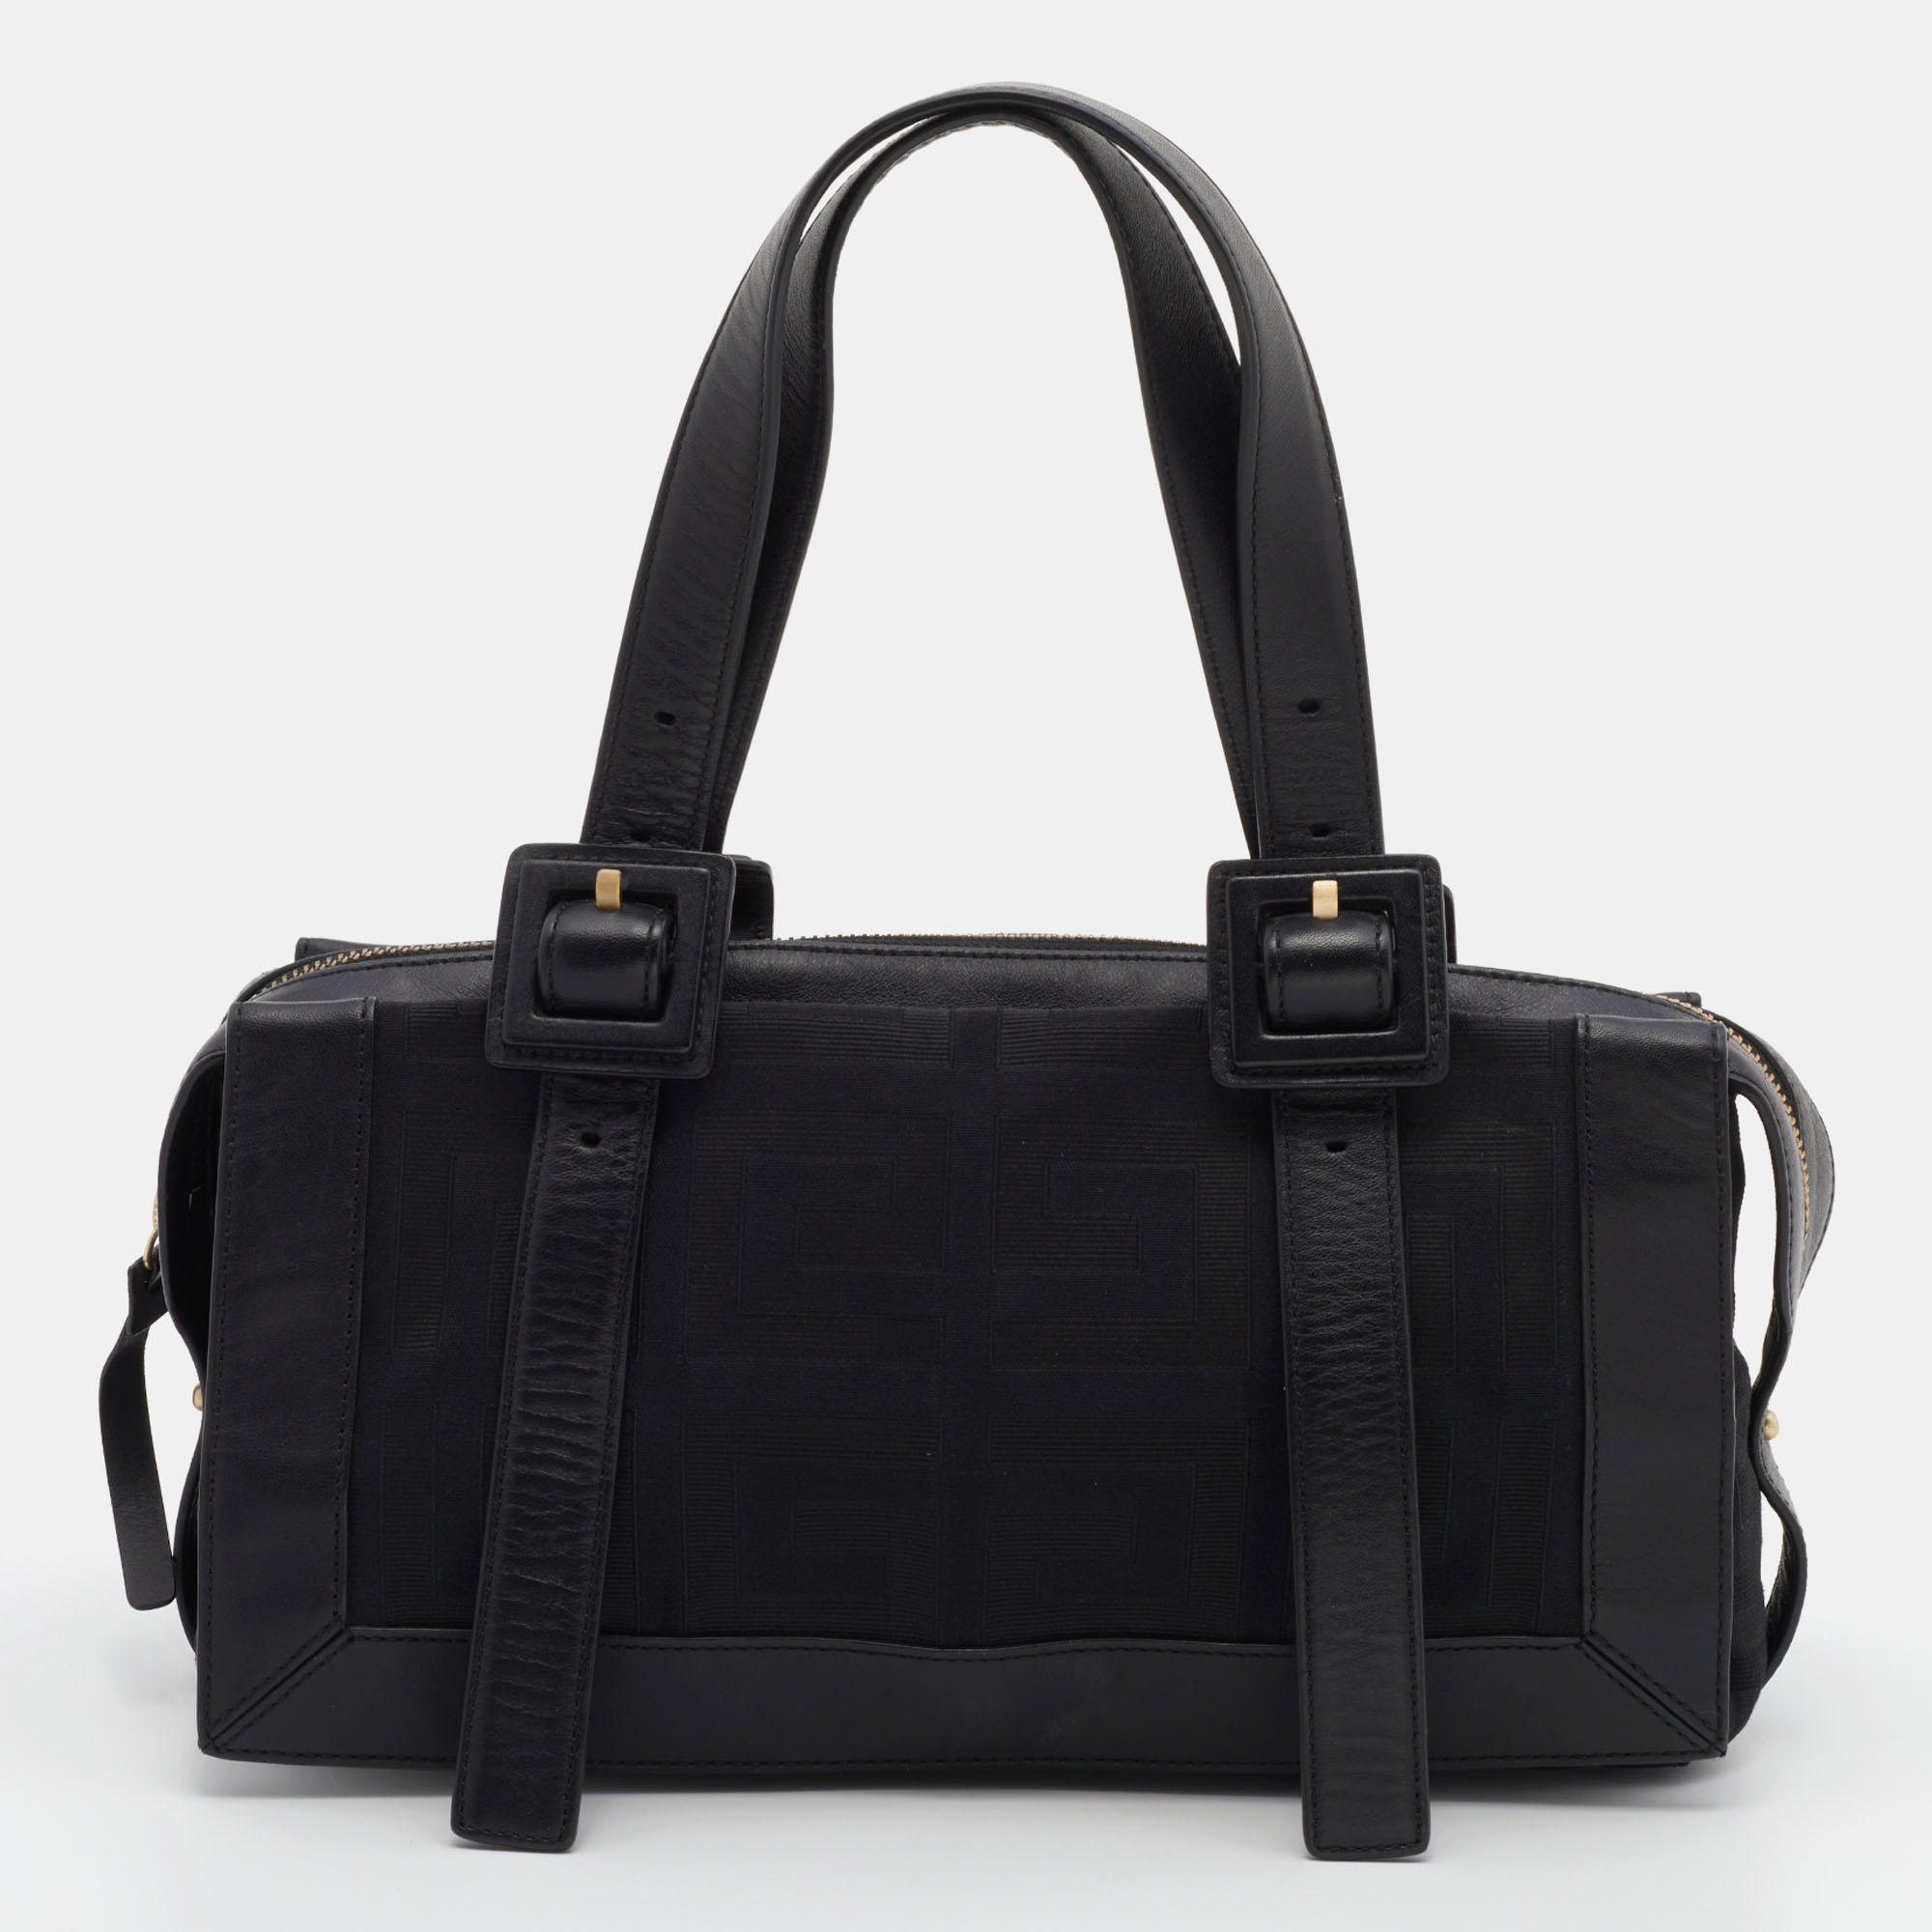 Givenchy Black Monogram Canvas And Leather Satchel